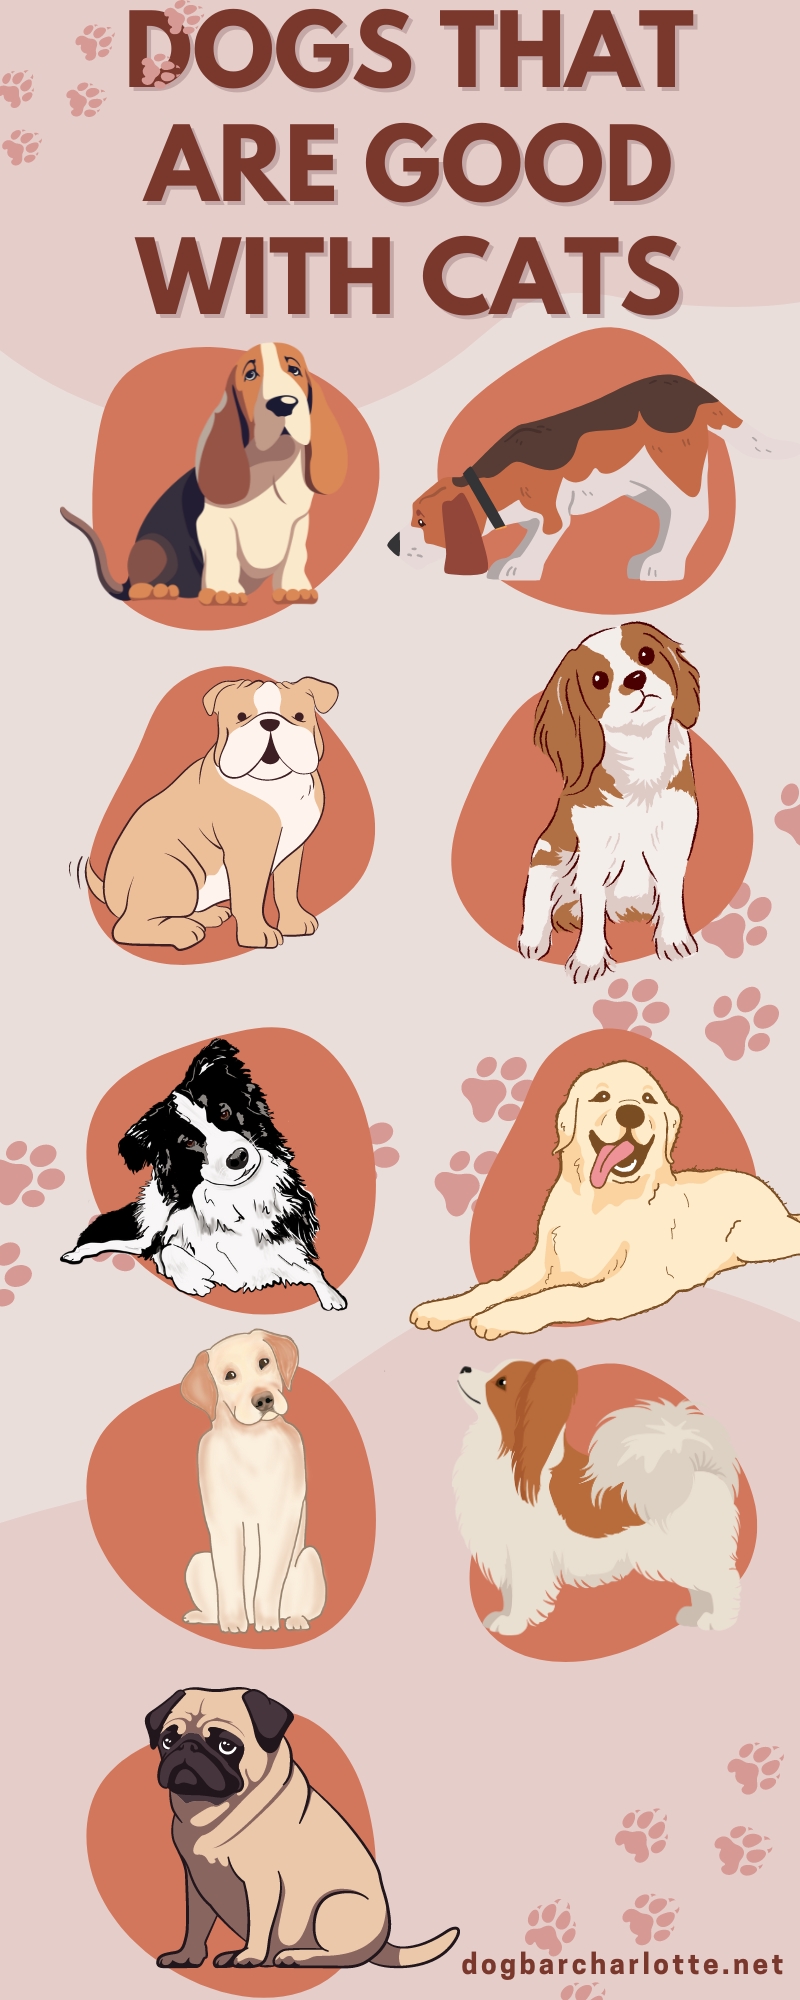 Infographic with Dog Breeds That Are Good with Cats